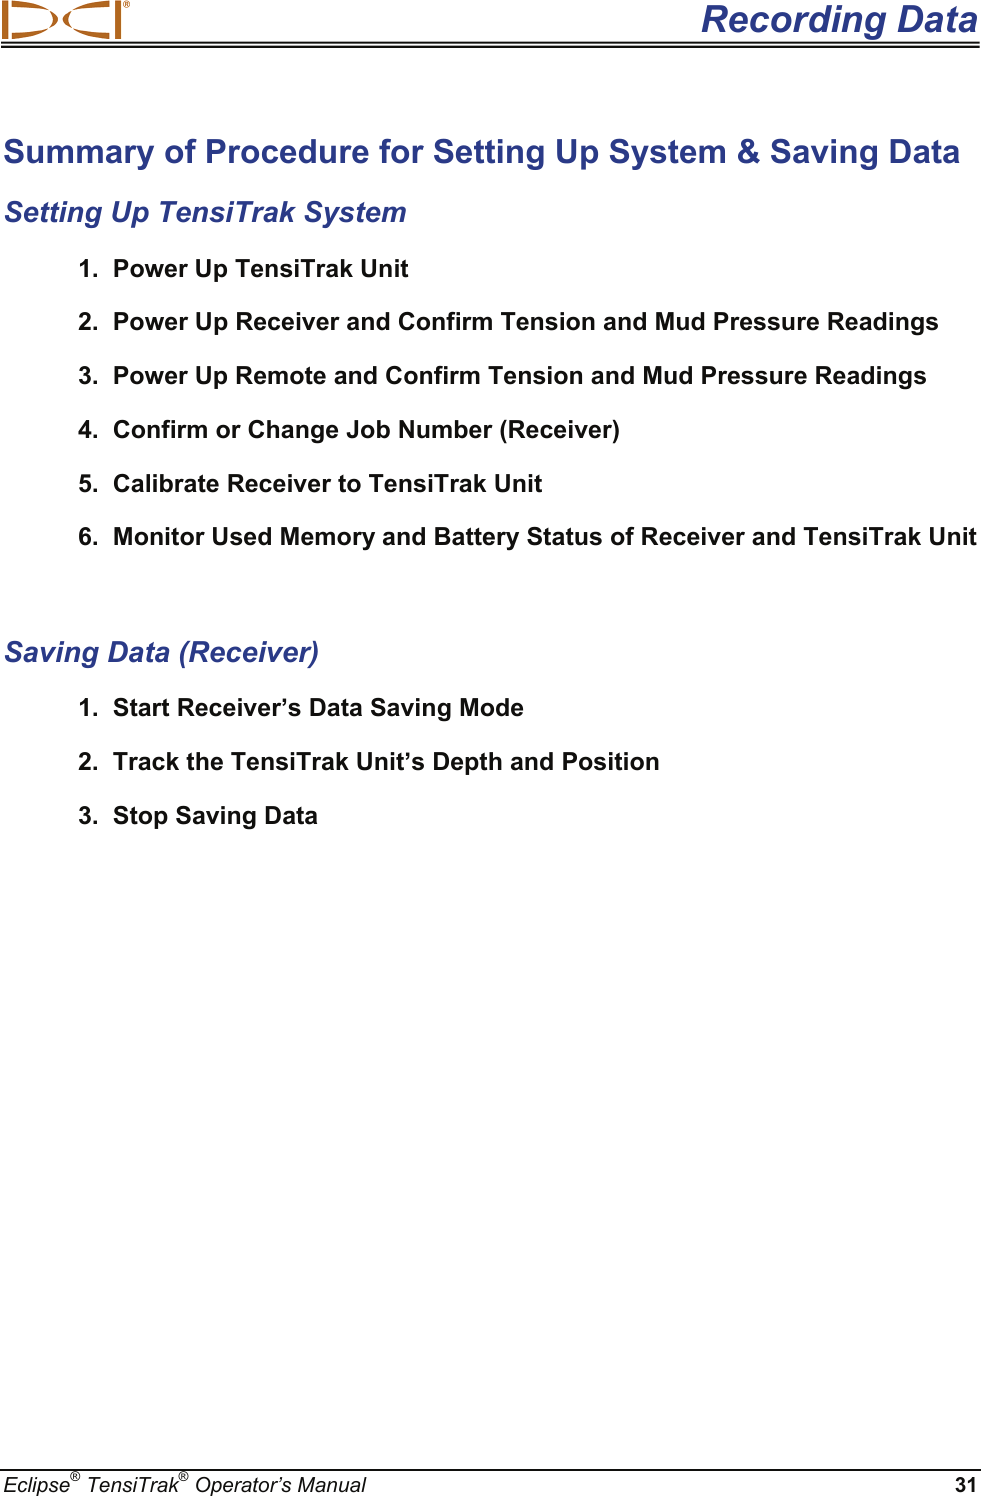  Recording Data Eclipse® TensiTrak® Operator’s Manual 31 Summary of Procedure for Setting Up System &amp; Saving Data Setting Up TensiTrak System 1.  Power Up TensiTrak Unit 2.  Power Up Receiver and Confirm Tension and Mud Pressure Readings  3.  Power Up Remote and Confirm Tension and Mud Pressure Readings 4.  Confirm or Change Job Number (Receiver) 5.  Calibrate Receiver to TensiTrak Unit 6.  Monitor Used Memory and Battery Status of Receiver and TensiTrak Unit   Saving Data (Receiver) 1.  Start Receiver’s Data Saving Mode 2.  Track the TensiTrak Unit’s Depth and Position 3.  Stop Saving Data     